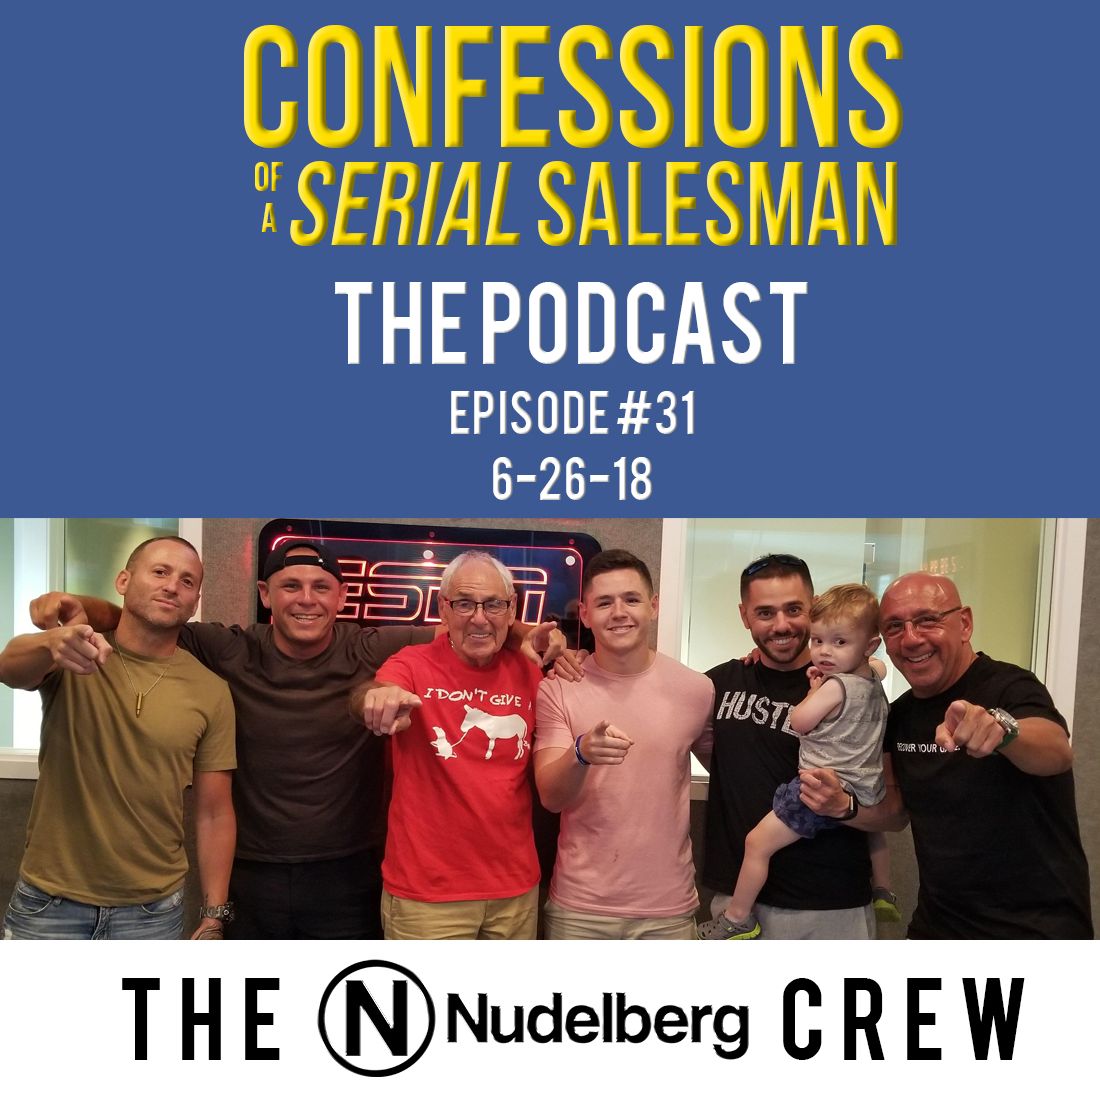 Confessions of a Serial Salesman The Podcast with the Nudelberg crew